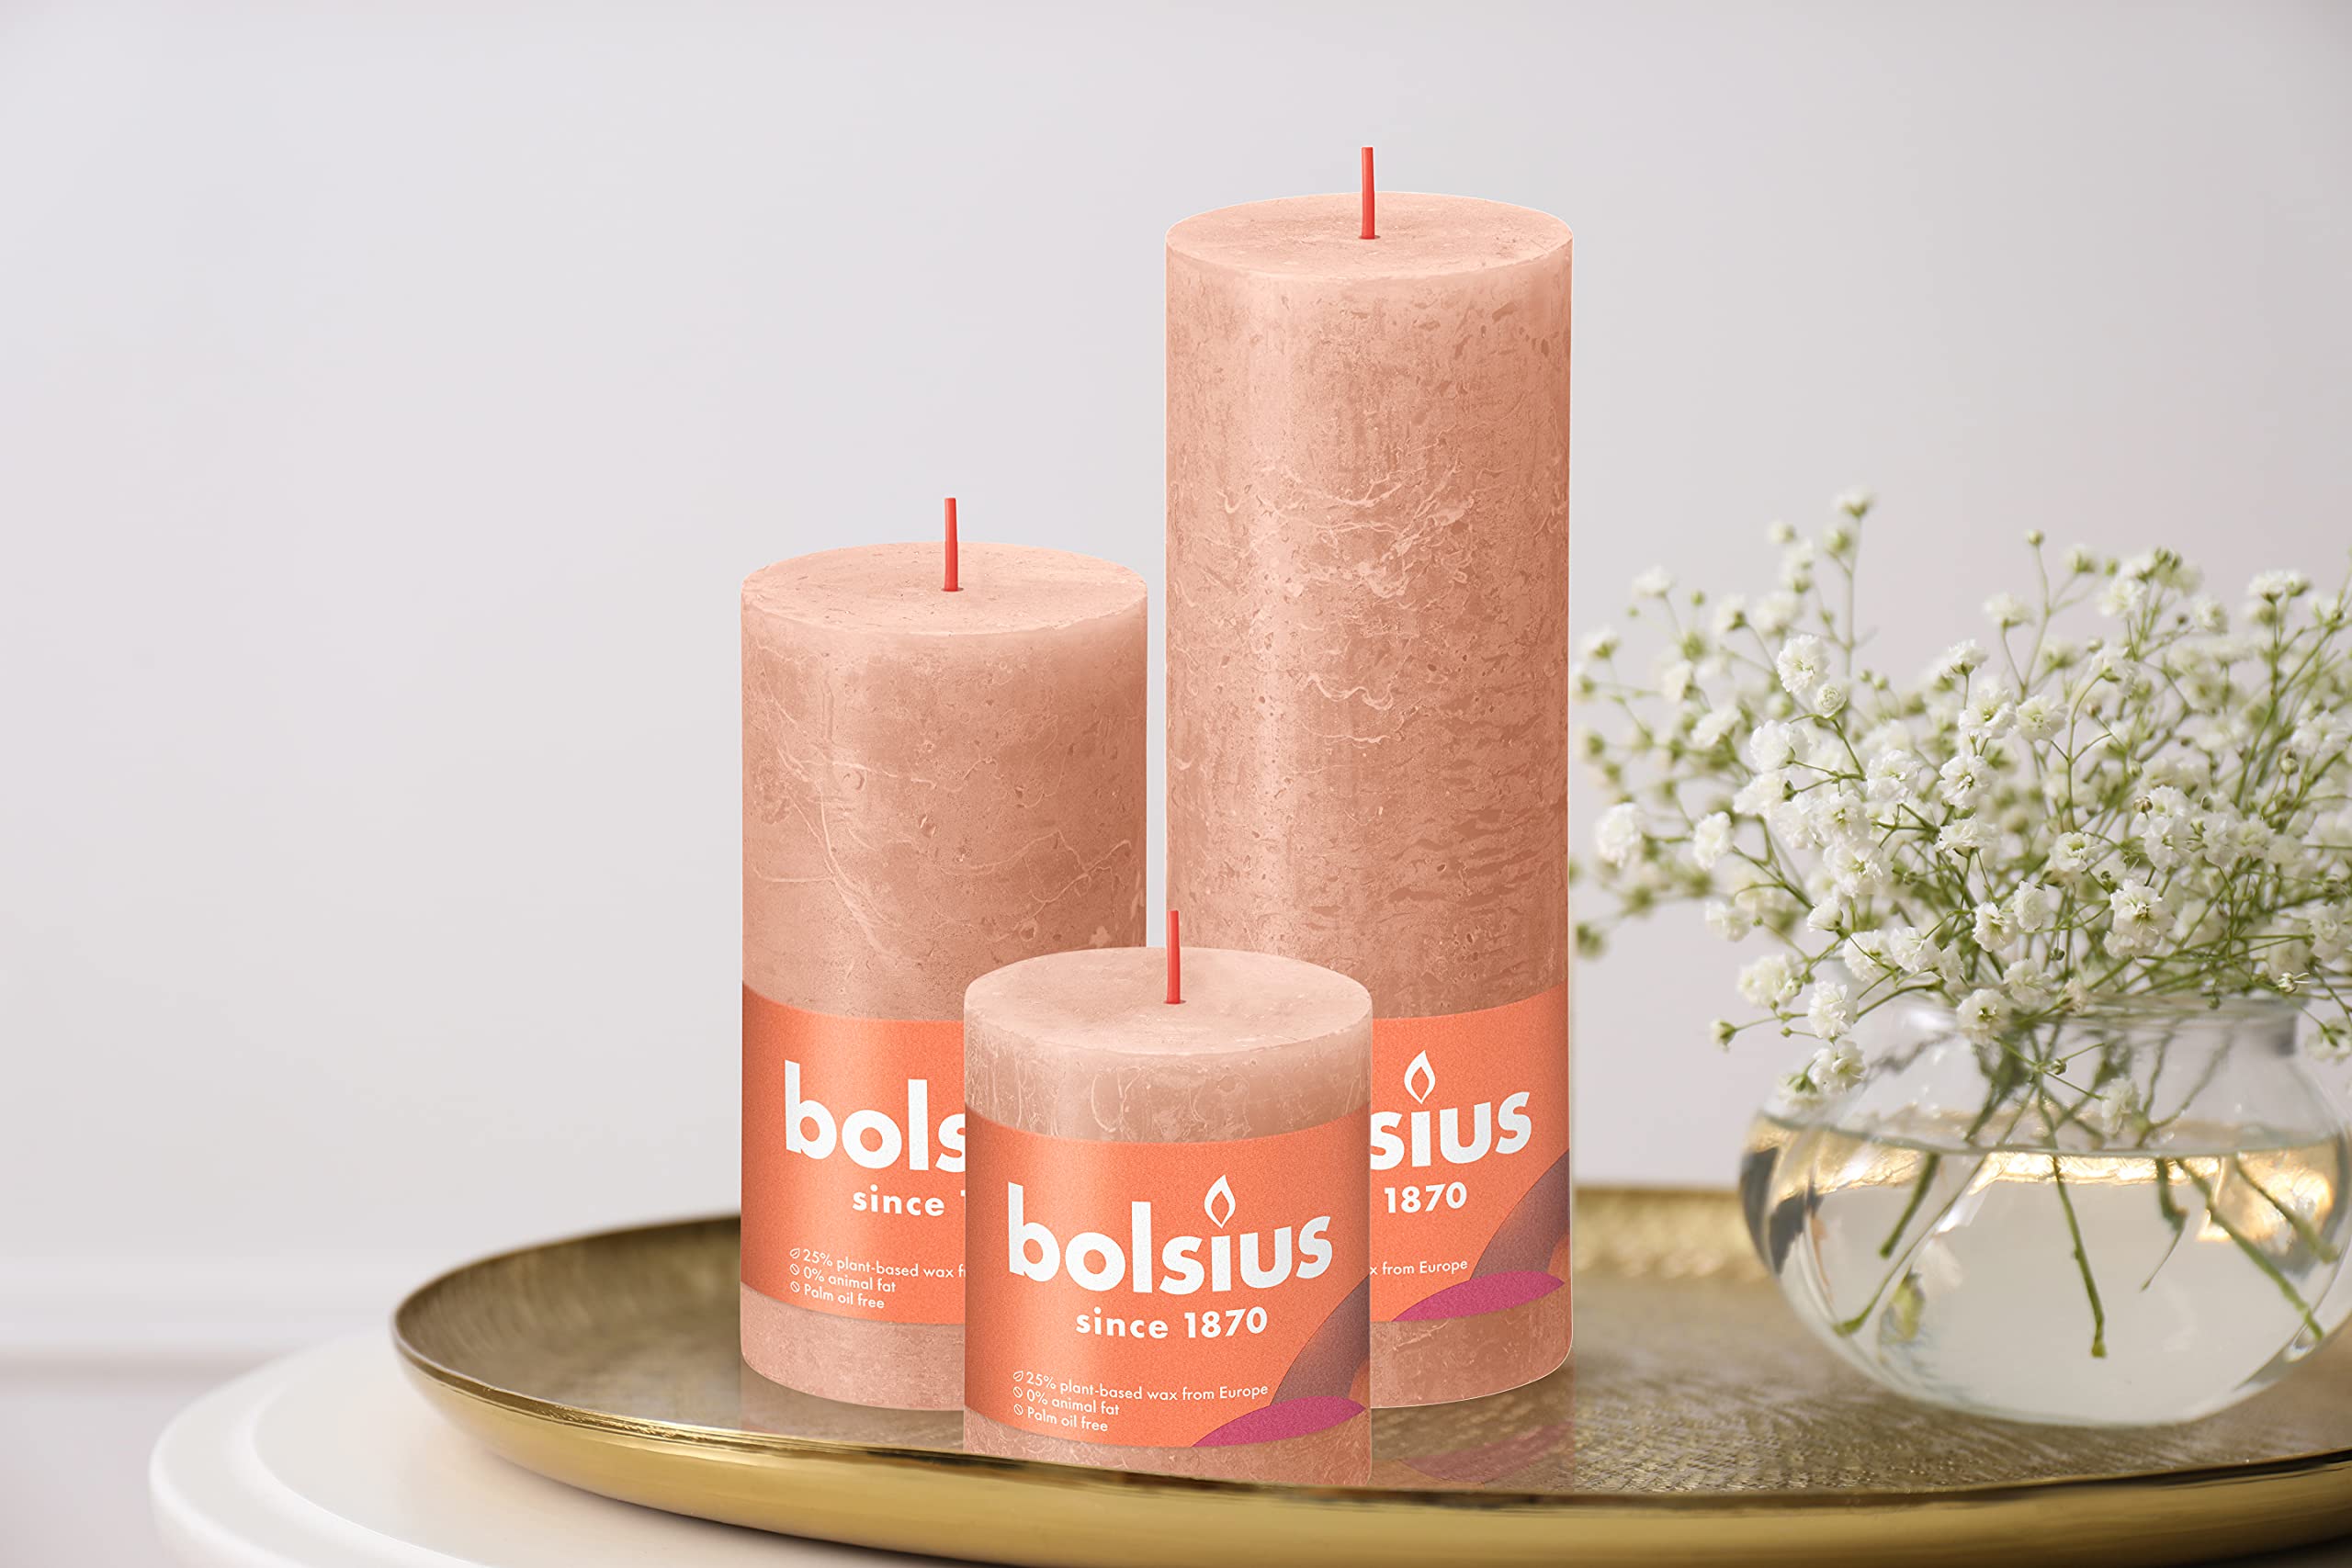 BOLSIUS 4 Pack Caramel Rustic Pillar Candles - 2.75 X 3.25 Inches - Premium European Quality - Includes Natural Plant-Based Wax - Unscented Dripless Smokeless 35 Hour Party and Wedding Candles  - Acceptable